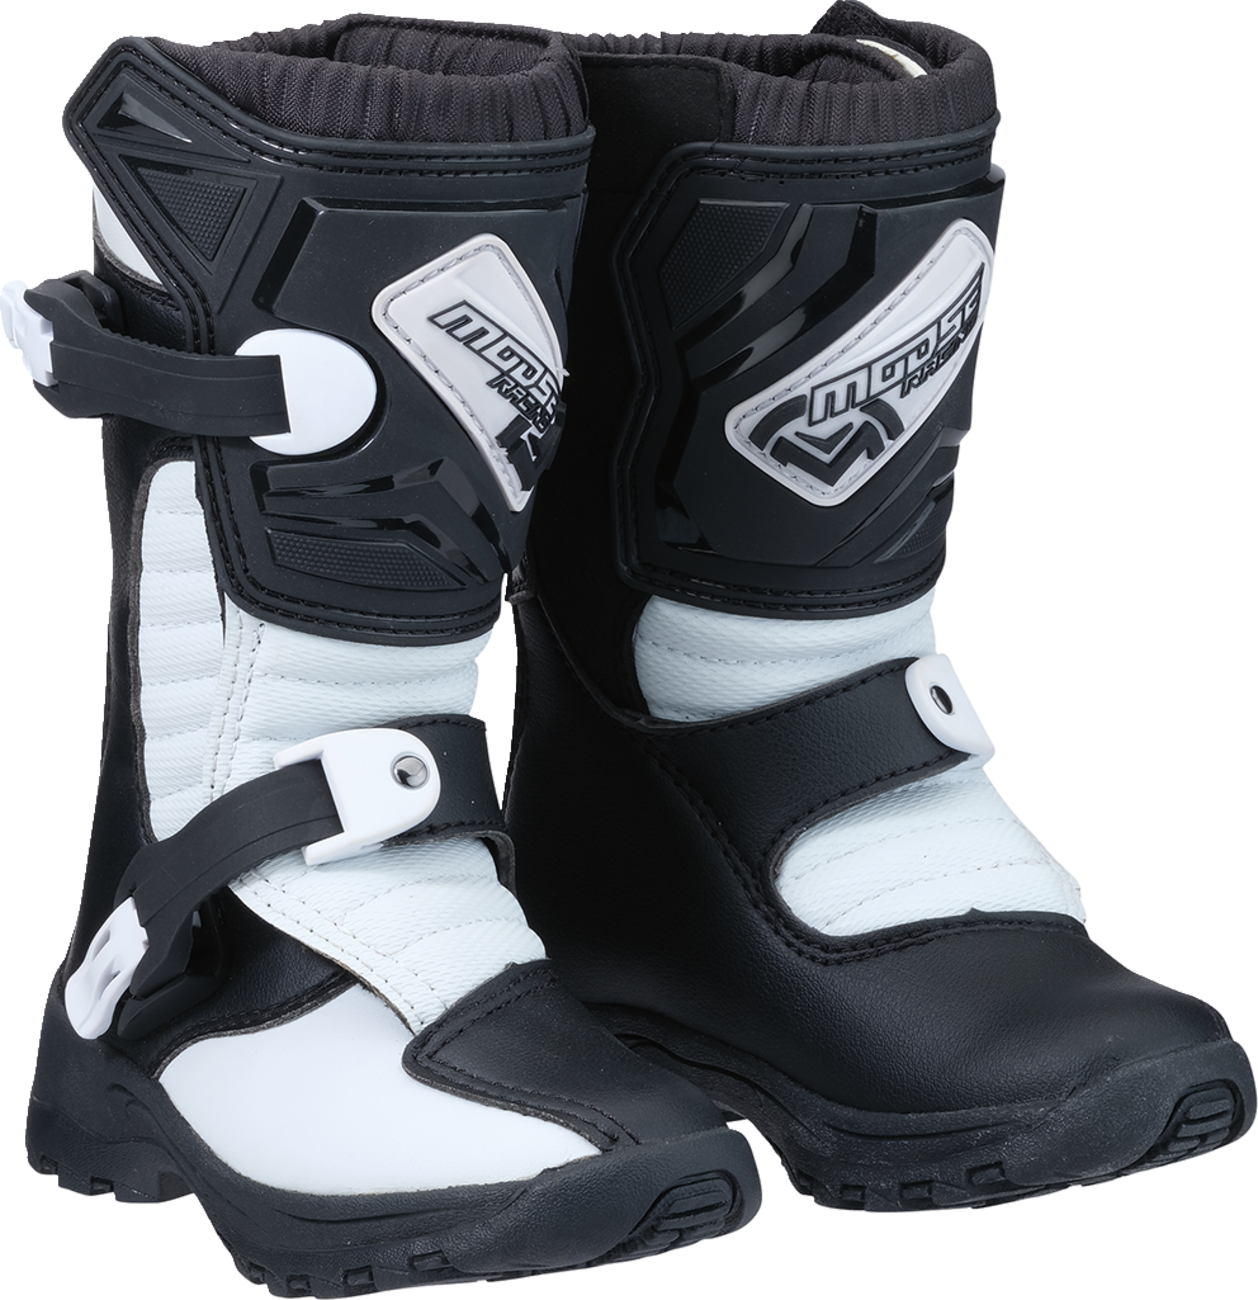 MOOSE RACING M1.3 Boots - Black/White - Size 7 3411-0436